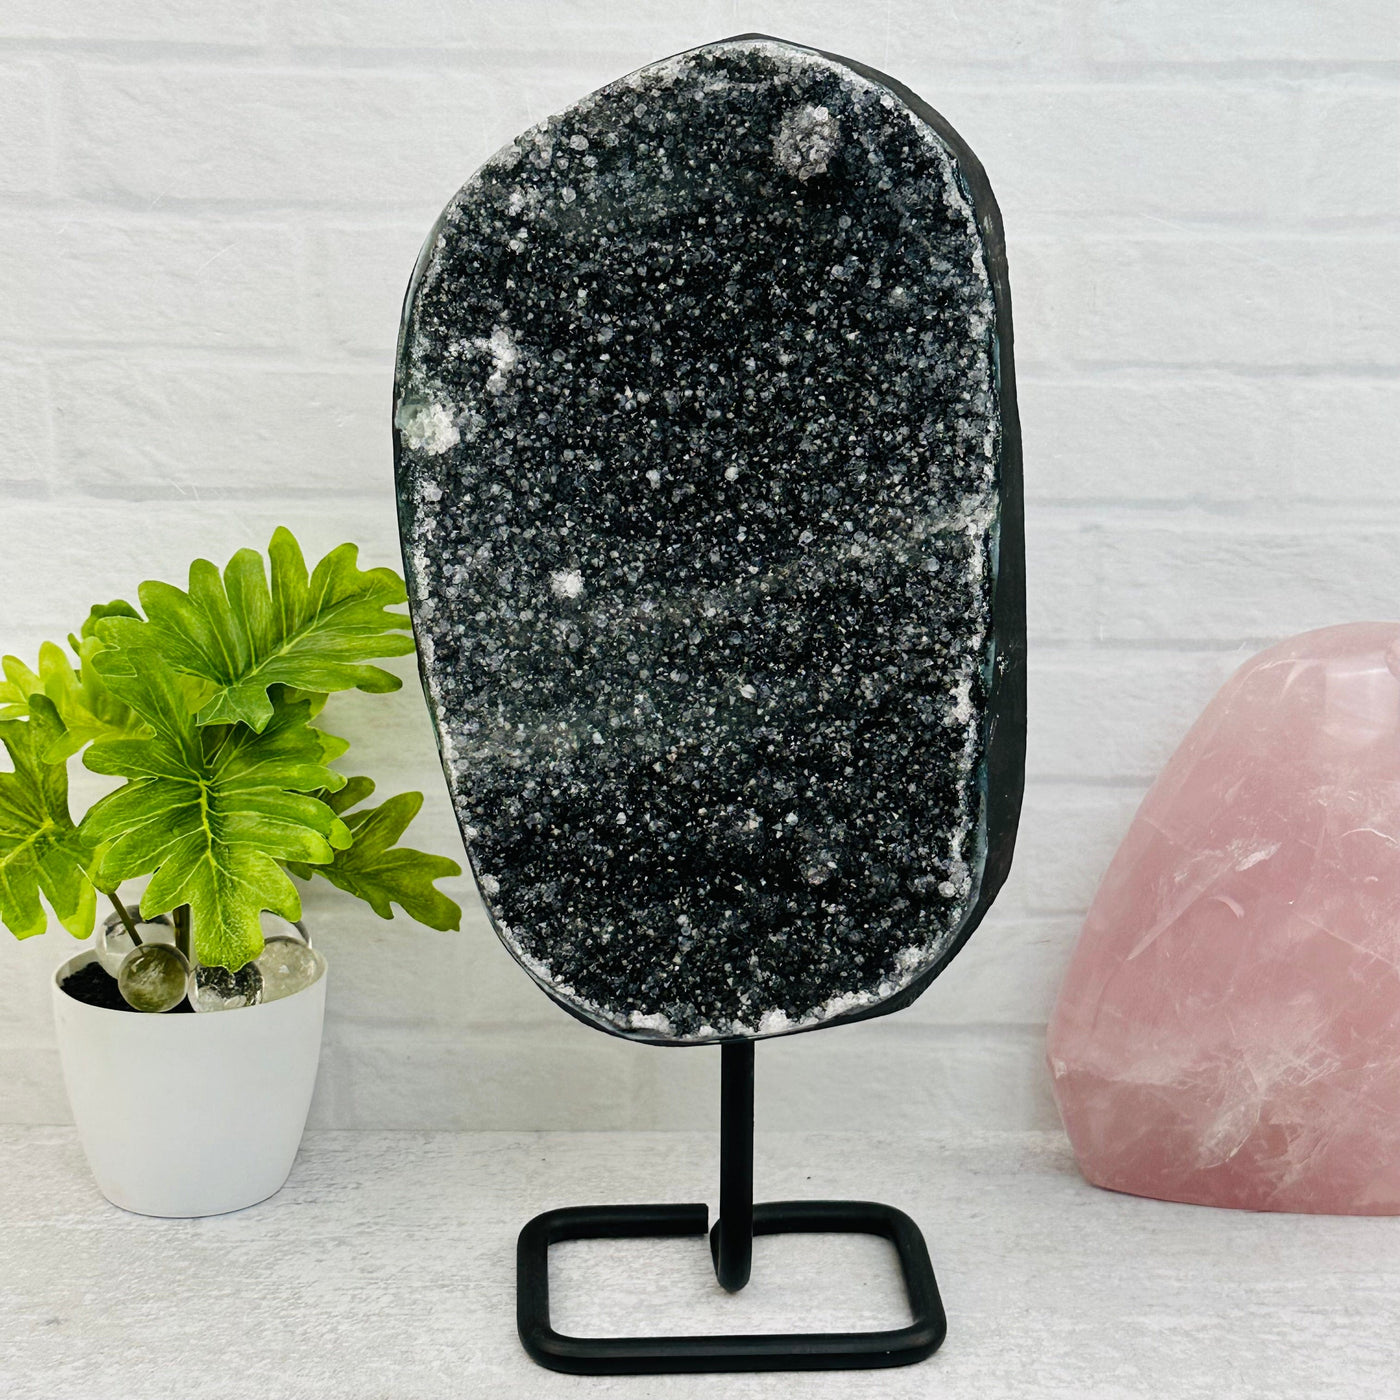 Black Amethyst Crystal Cluster on Metal Stand displayed as home decor